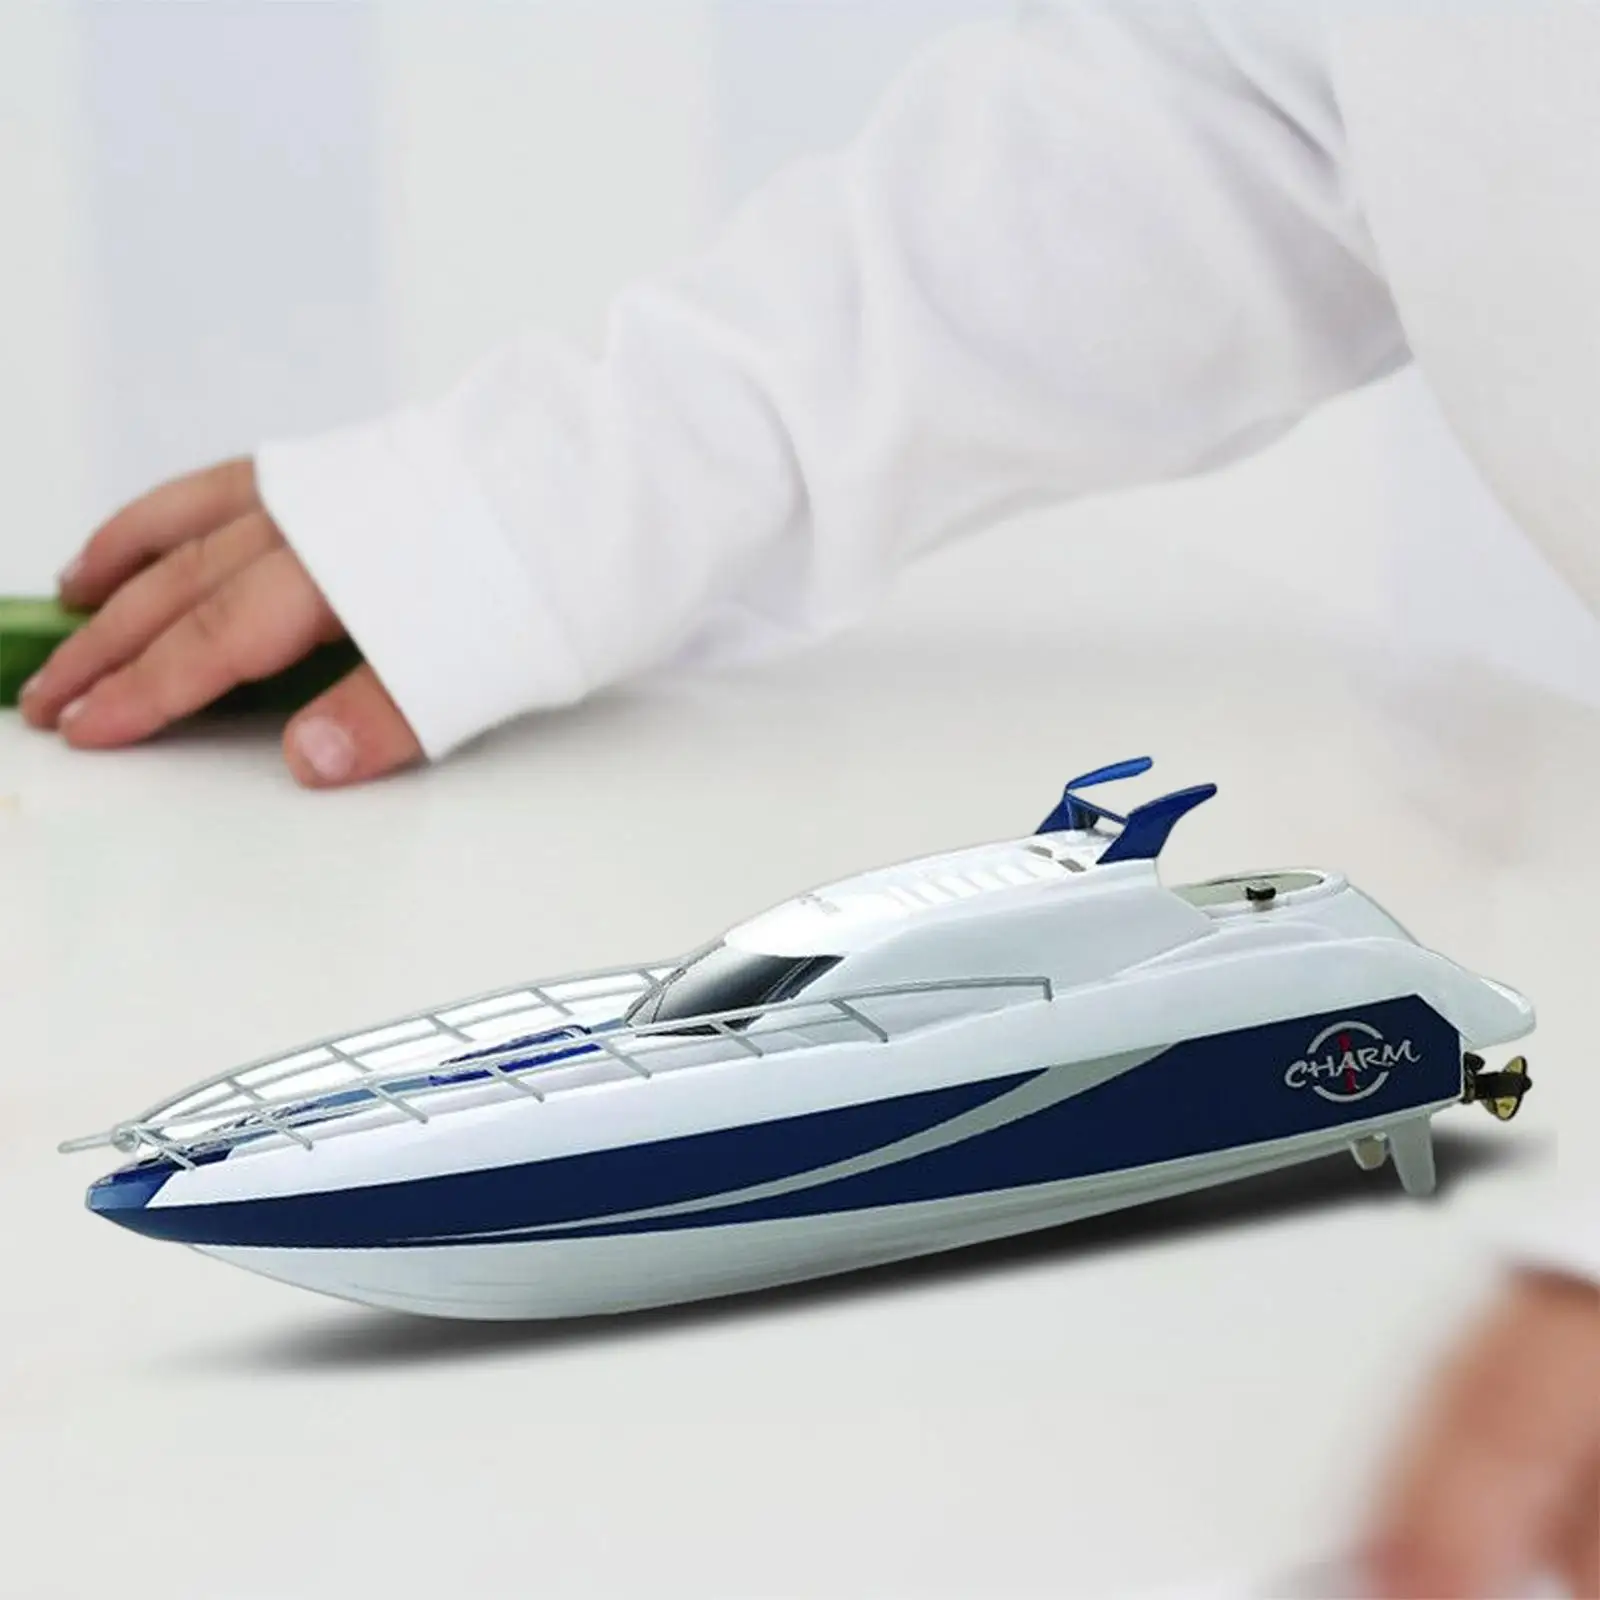 Portable Remote Control Boat Toy USB Rechargeable for Adults Children Girls